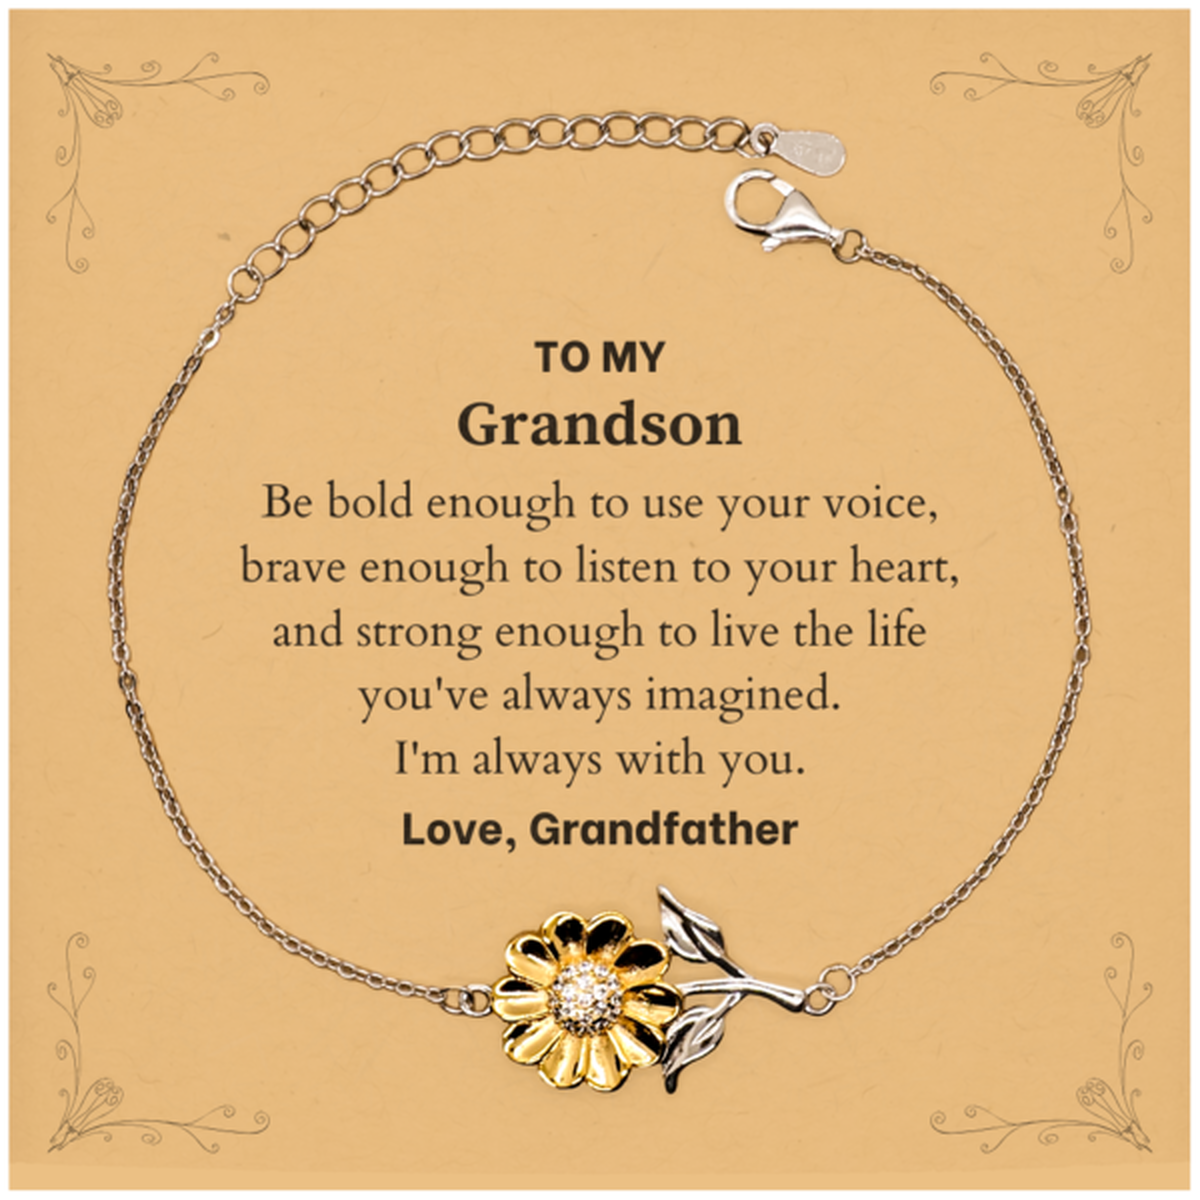 Keepsake Grandson Sunflower Bracelet Gift Idea Graduation Christmas Birthday Grandson from Grandfather, Grandson Be bold enough to use your voice, brave enough to listen to your heart. Love, Grandfather